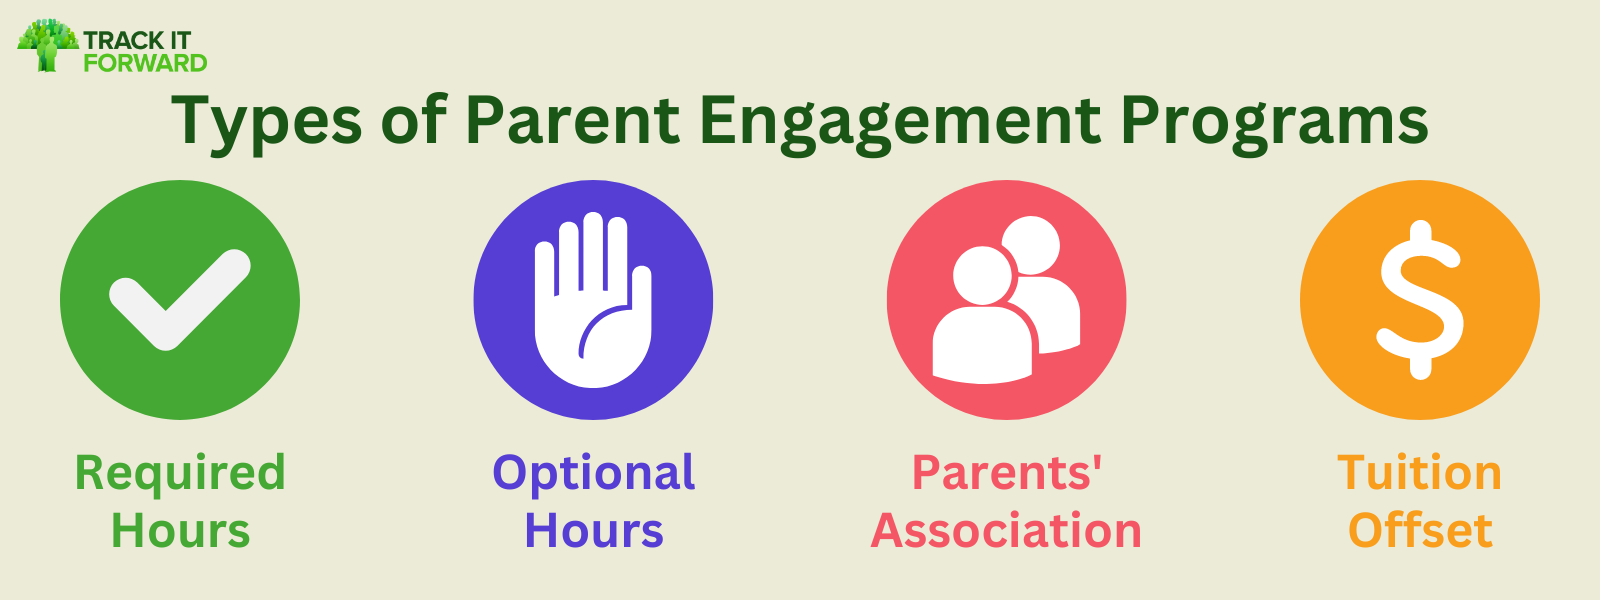 Types of Parent Engagement Programs Graphic
1. Required Hours
2. Optional Hours
3. Parents' Association
4. Tuition Offset